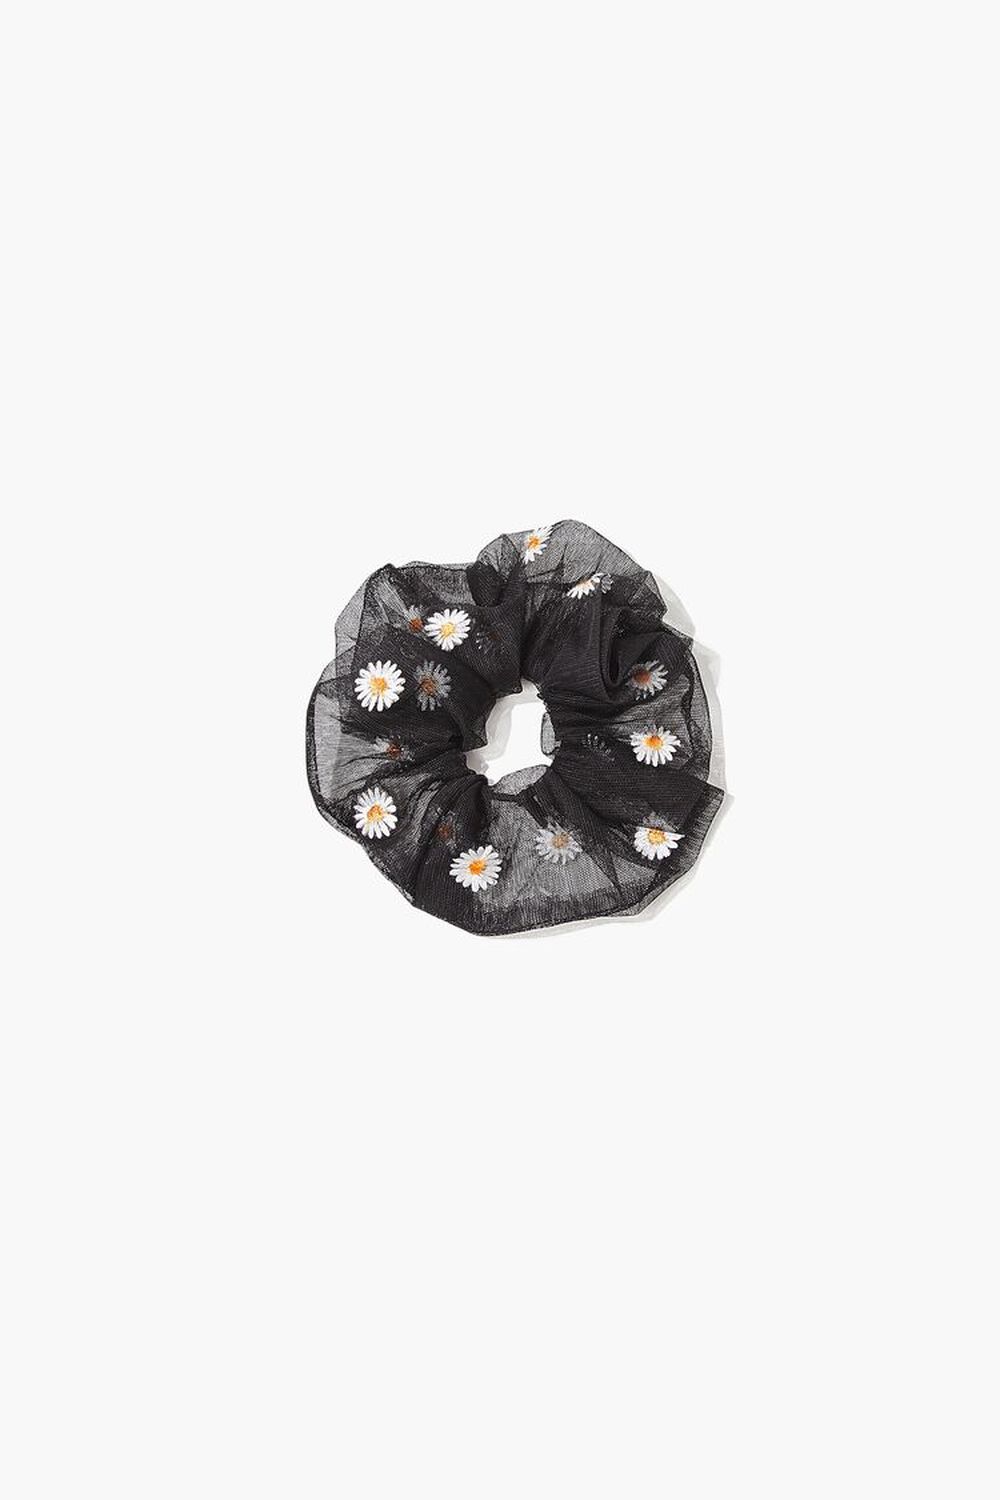 BLACK/MULTI Embroidered Daisy Floral Scrunchie, image 1